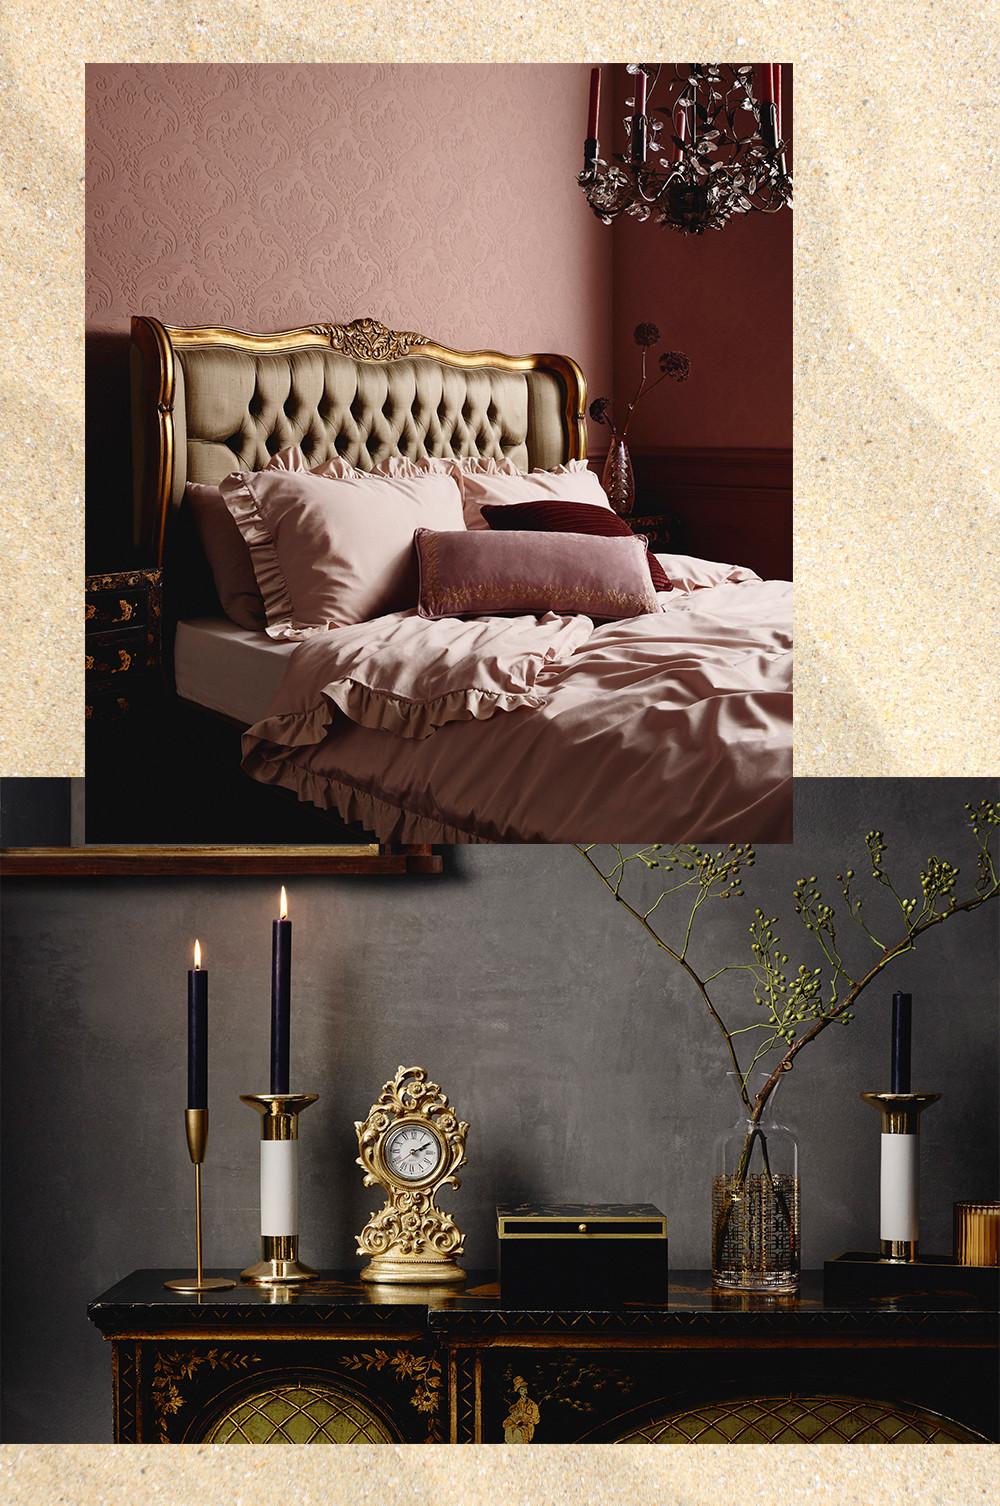 Luxe bedroom scene, pink bedding, candles and gold accessories